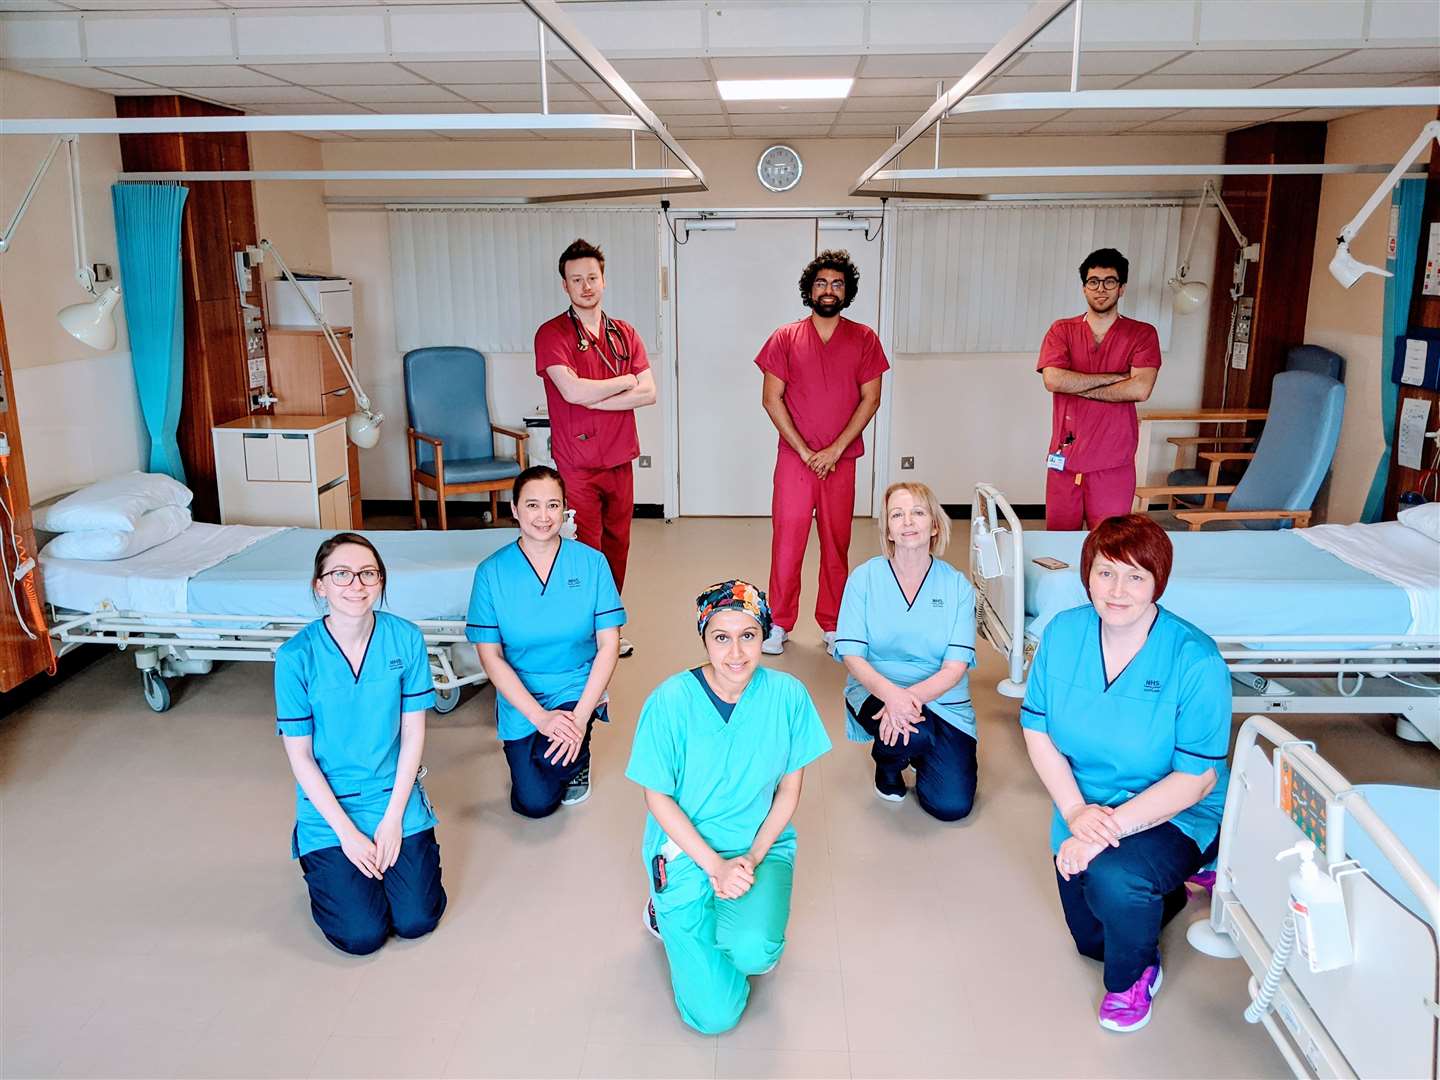 Some of the staff at Caithness General Hospital after the video call with Victoria Beckham. Dr Hina Jamall can be seen at the front, with her husband Dr Danish Humayon in the middle at the back. Among those looking on are Bignold Wing staff nurse Susan Roberson (front right), while in the second row are staff nurse Theresa Balatazar (left) and Yvonne Wilson.